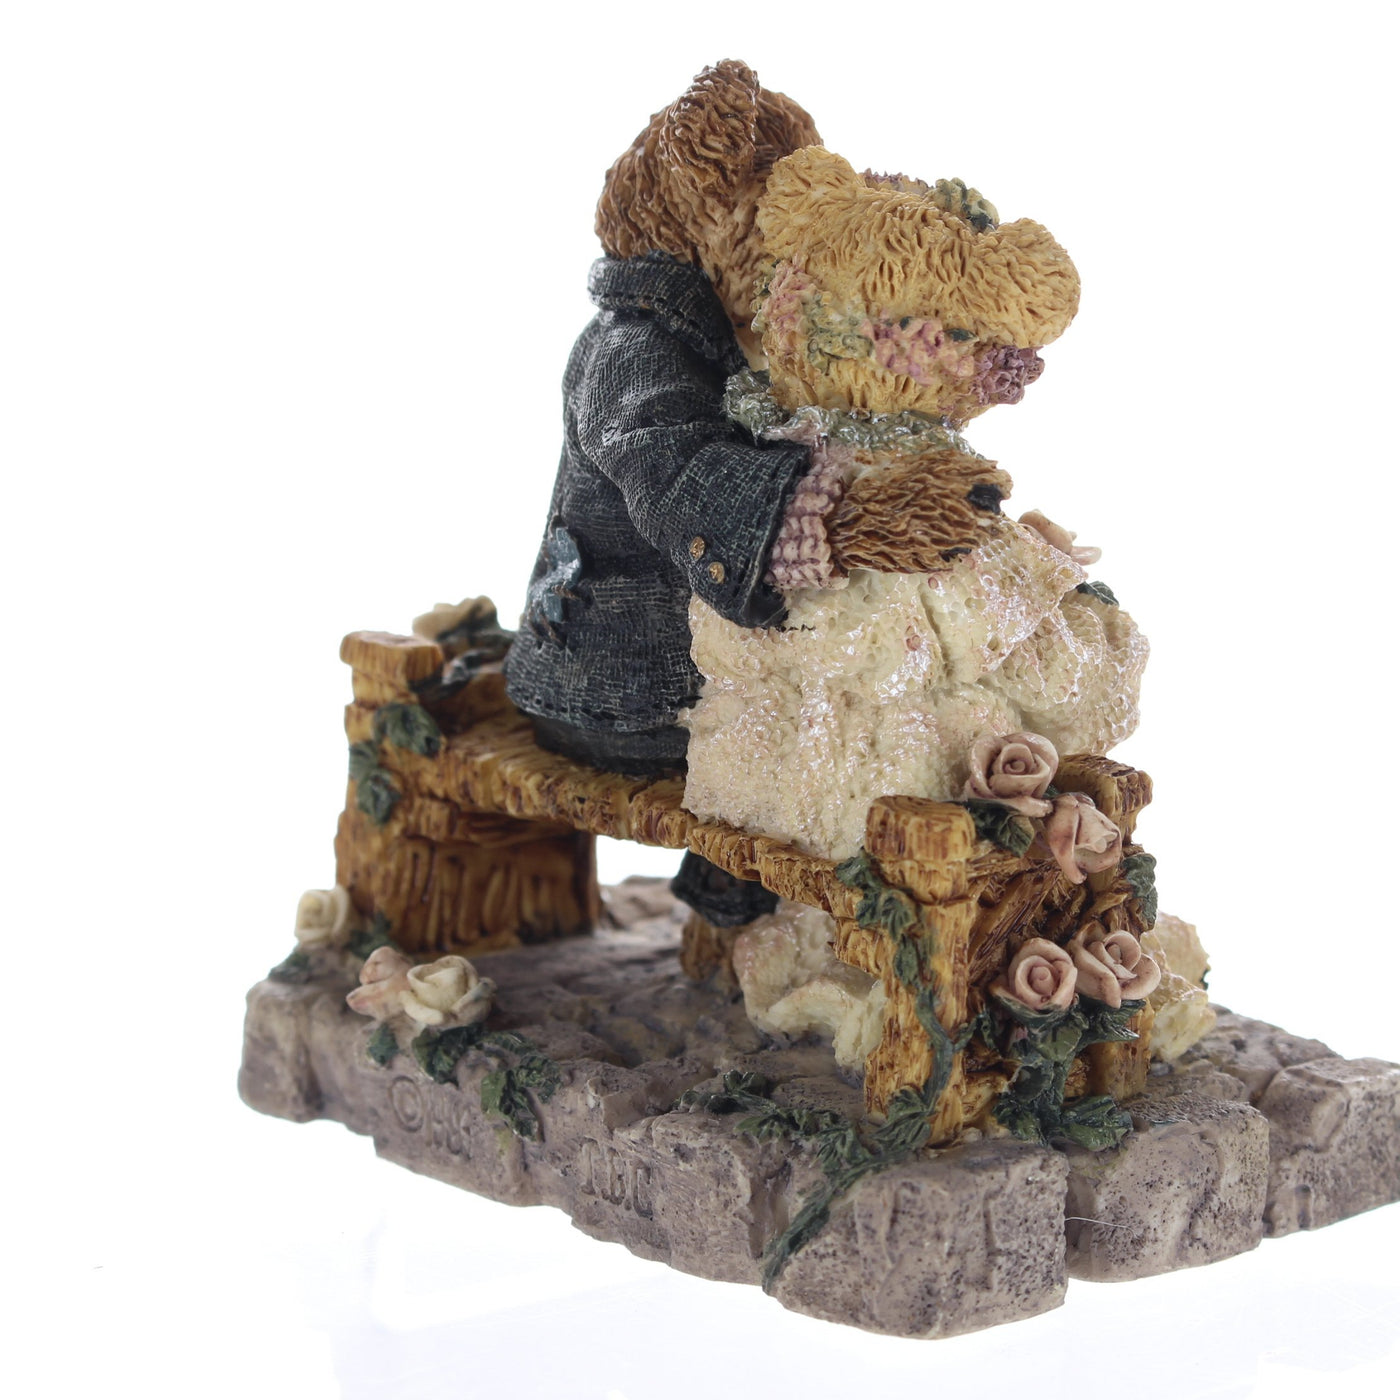 Boyds-Bears-Friends-Bearstone-Figurine-Grenville-and-BeatriceBest-Friends-2021_06